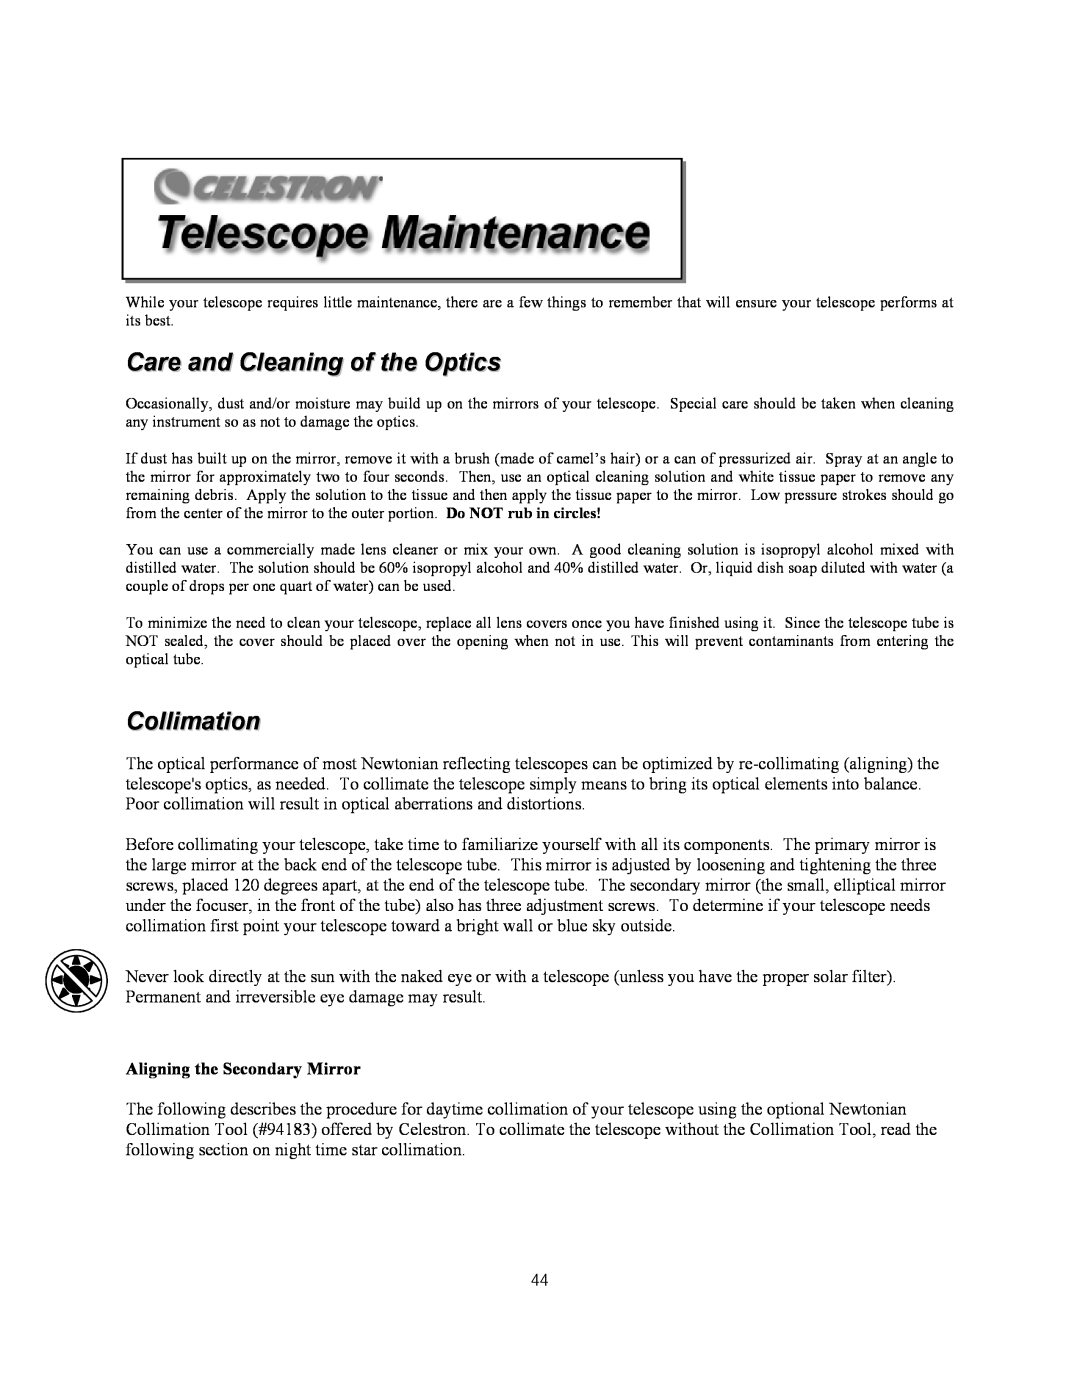 Celestron C10-N, C8-NGT manual Care and Cleaning of the Optics, Collimation, Aligning the Secondary Mirror 